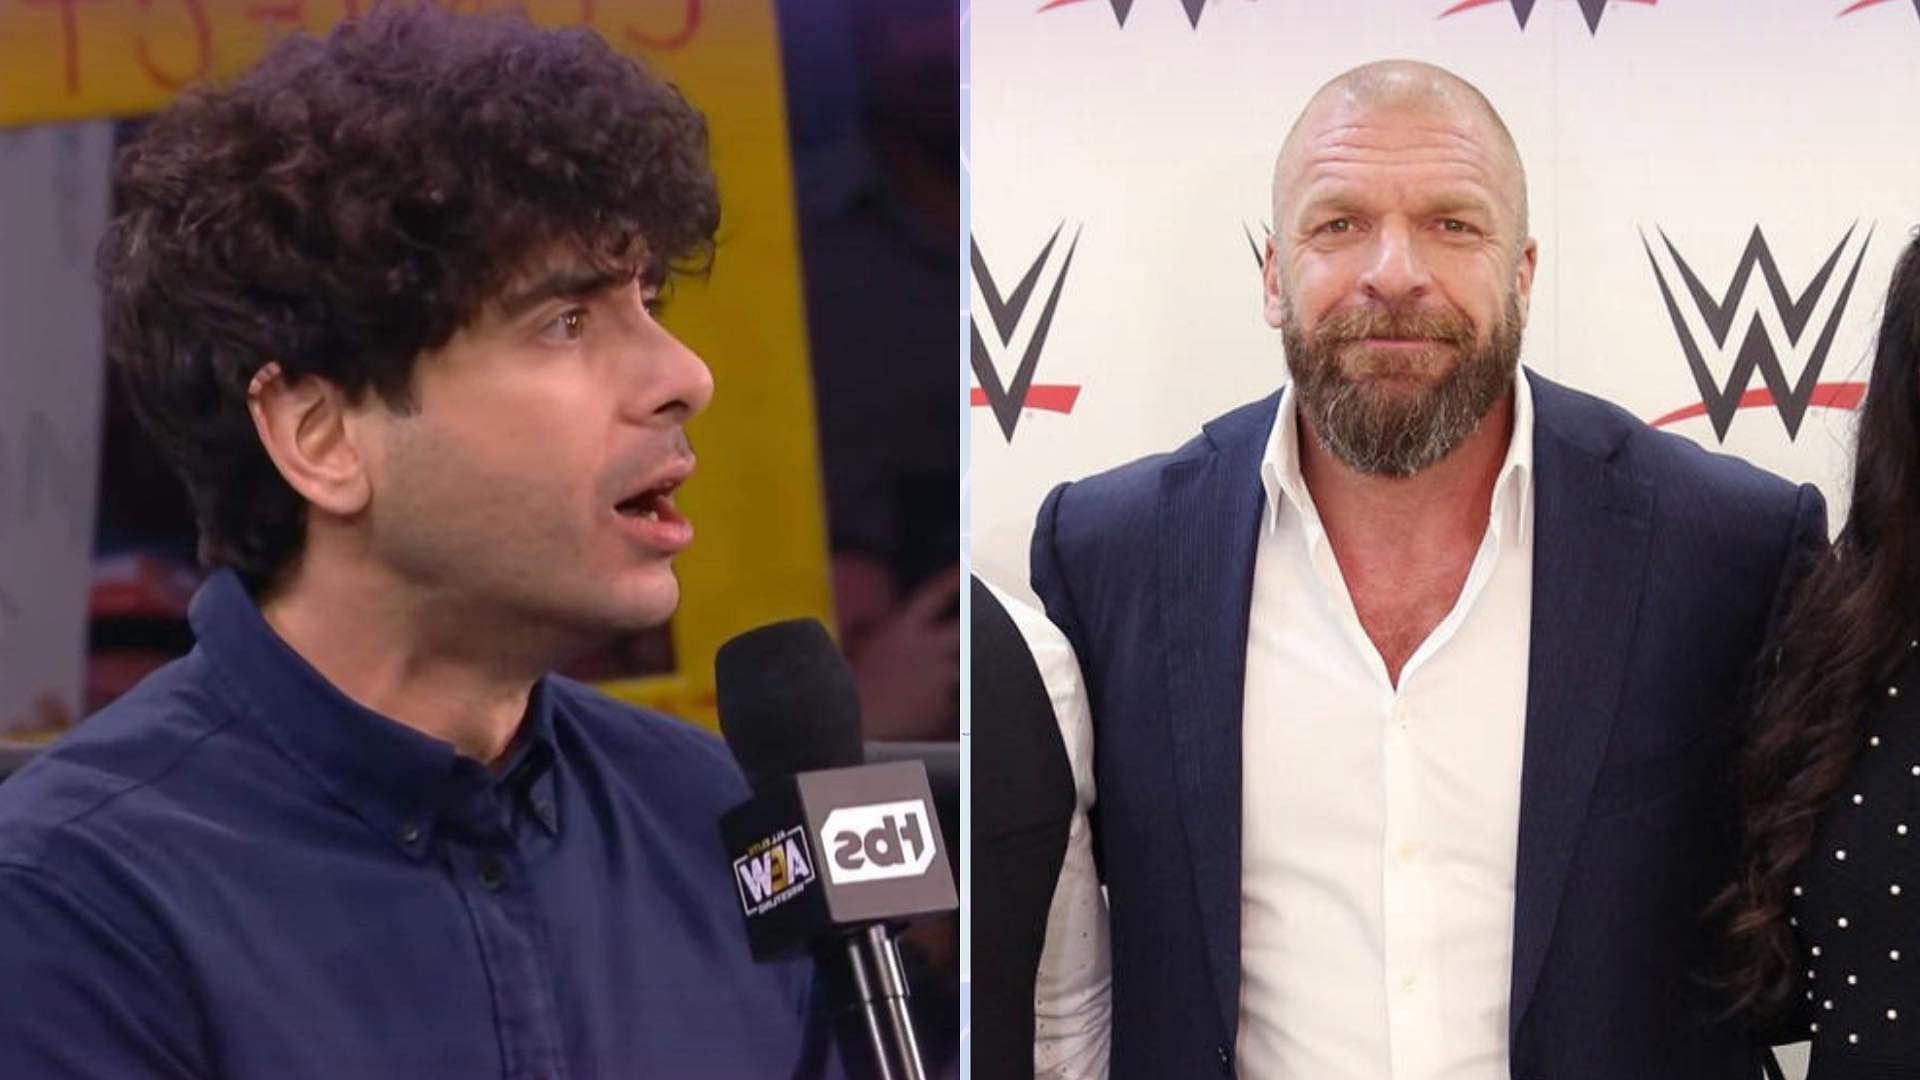 Tony Khan and Triple are key figures in AEW, and WWE respectively [Photos courtesy of AEW